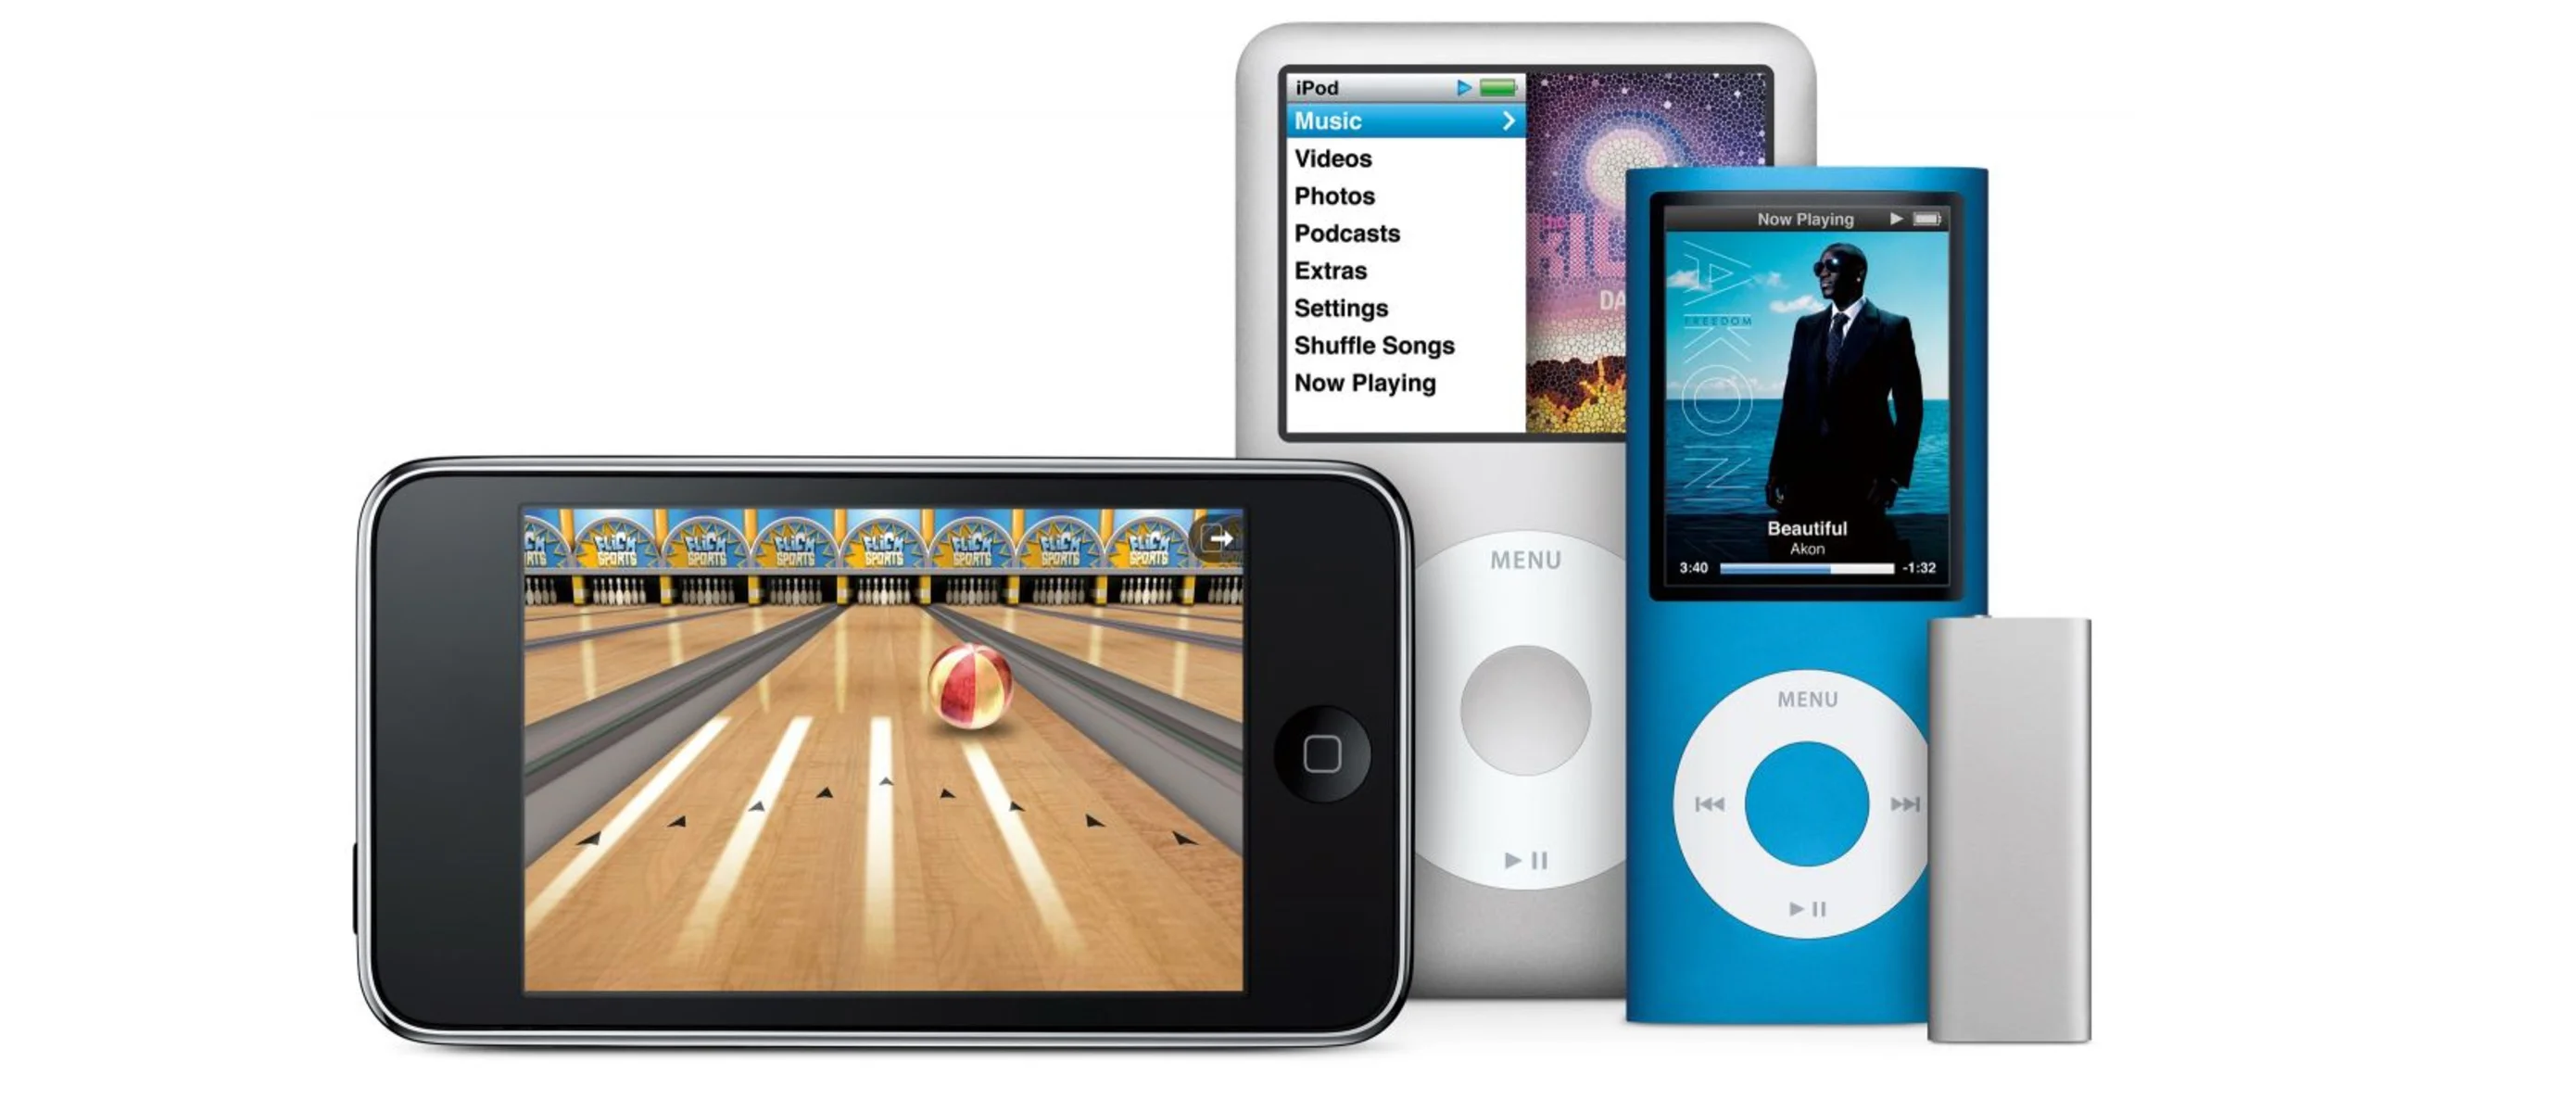 The iPod is dead. Apple closes the production of the legendary player